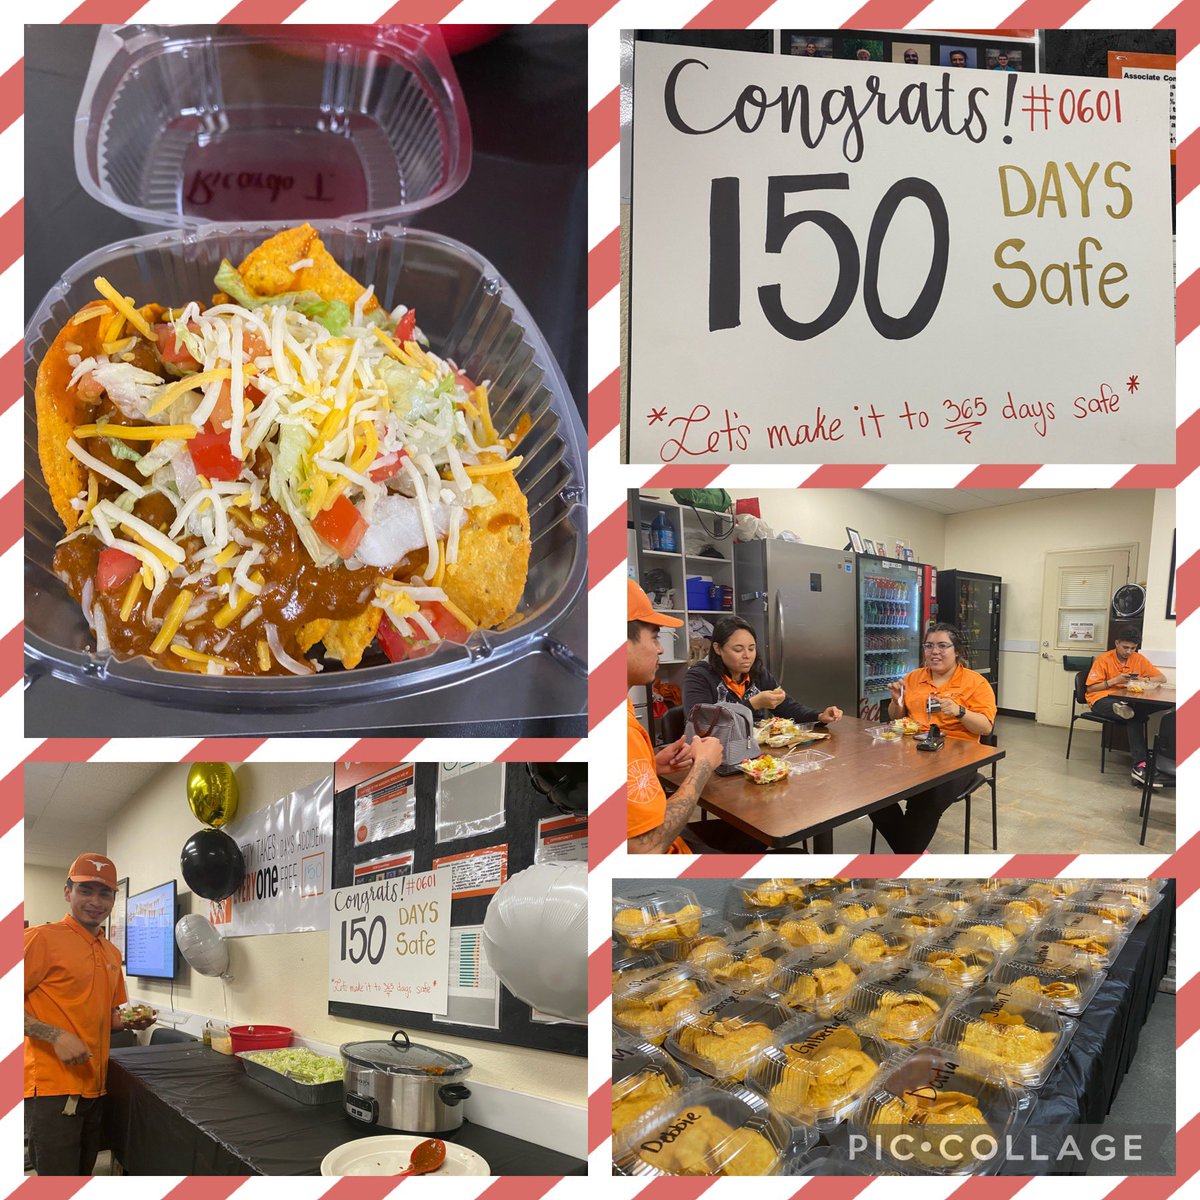 Celebrating our 150 days safe today! The taco salads were a hit. On our way to 365 days safe!! Let’s go team! #0601STRONG @bennyattmma @EditReyes4 @LisaFerence @JabarrBean